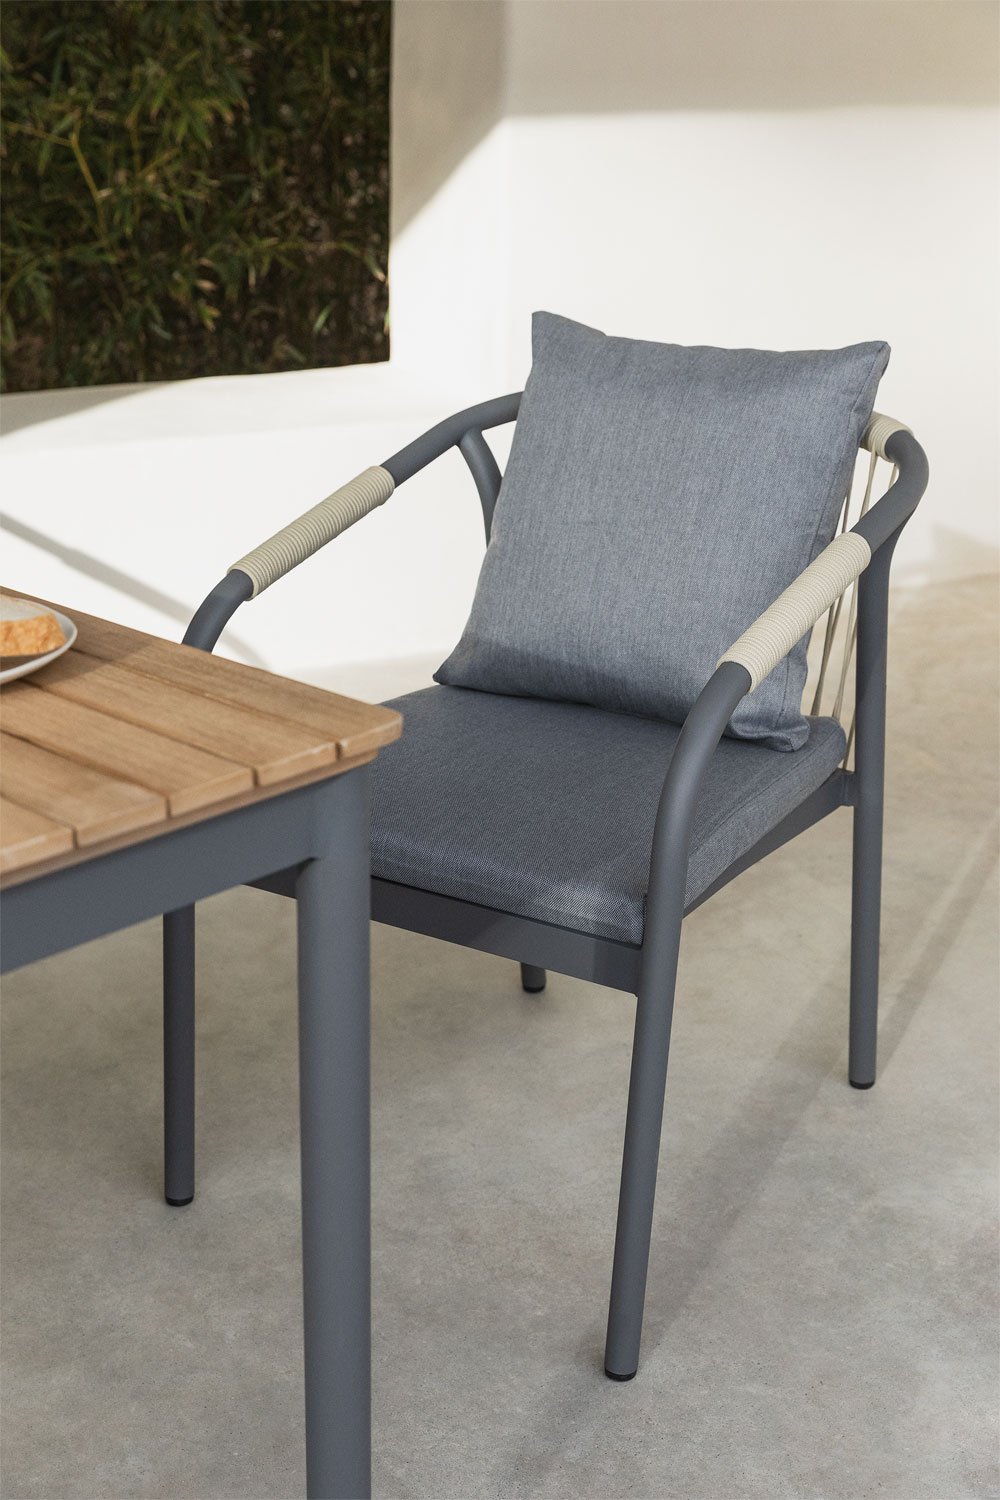 Garden Chair with Aluminum Armrests and Basper Rope, gallery image 1